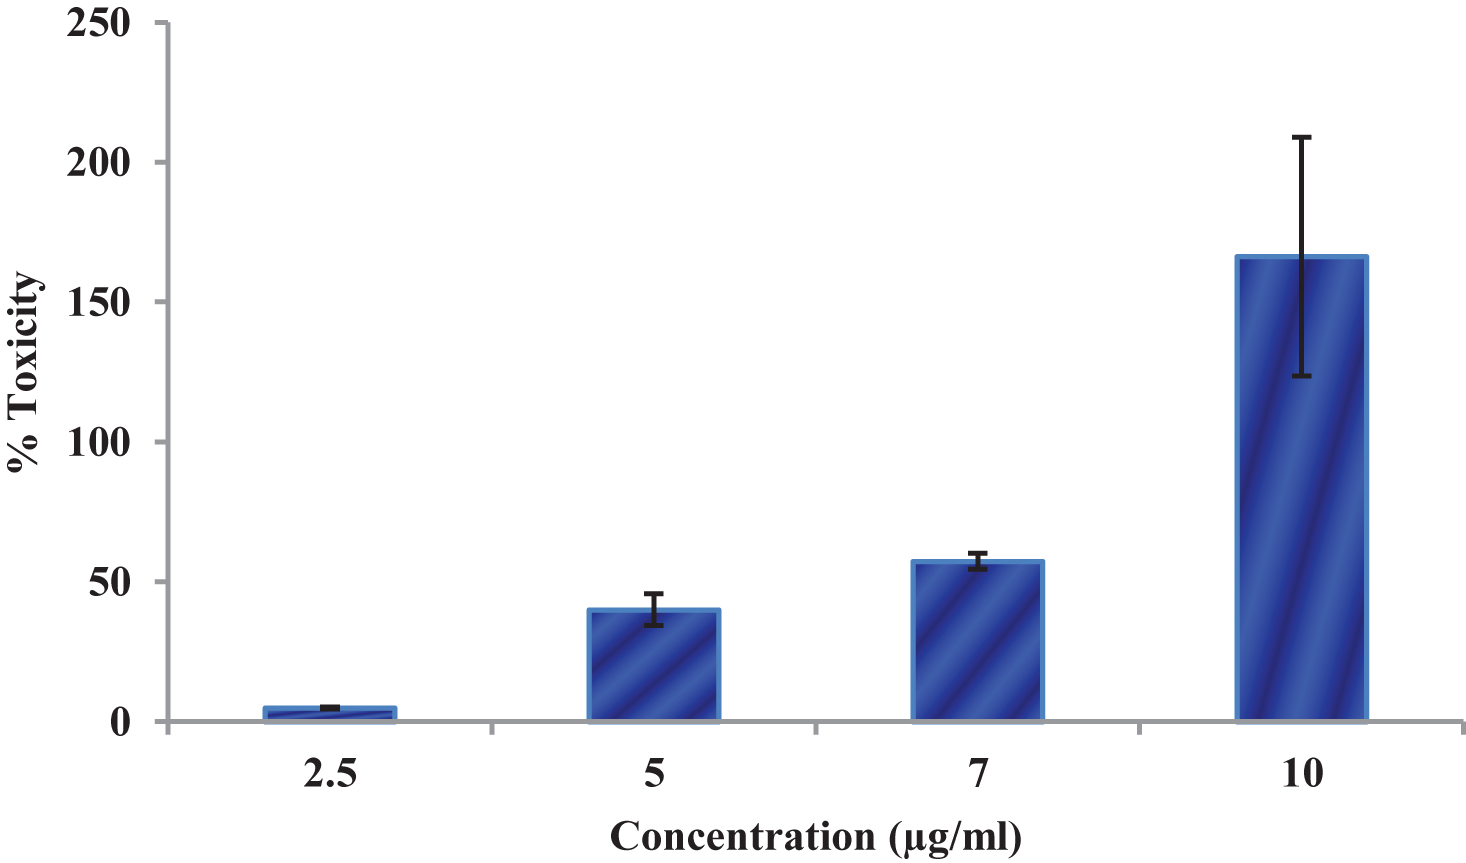 LDH Leakage levels in control and CKf treated DU-145 cells. Values are expressed as Mean±SD of three independent experiments. * Statistically significant compared to control cells (p < 0.05).